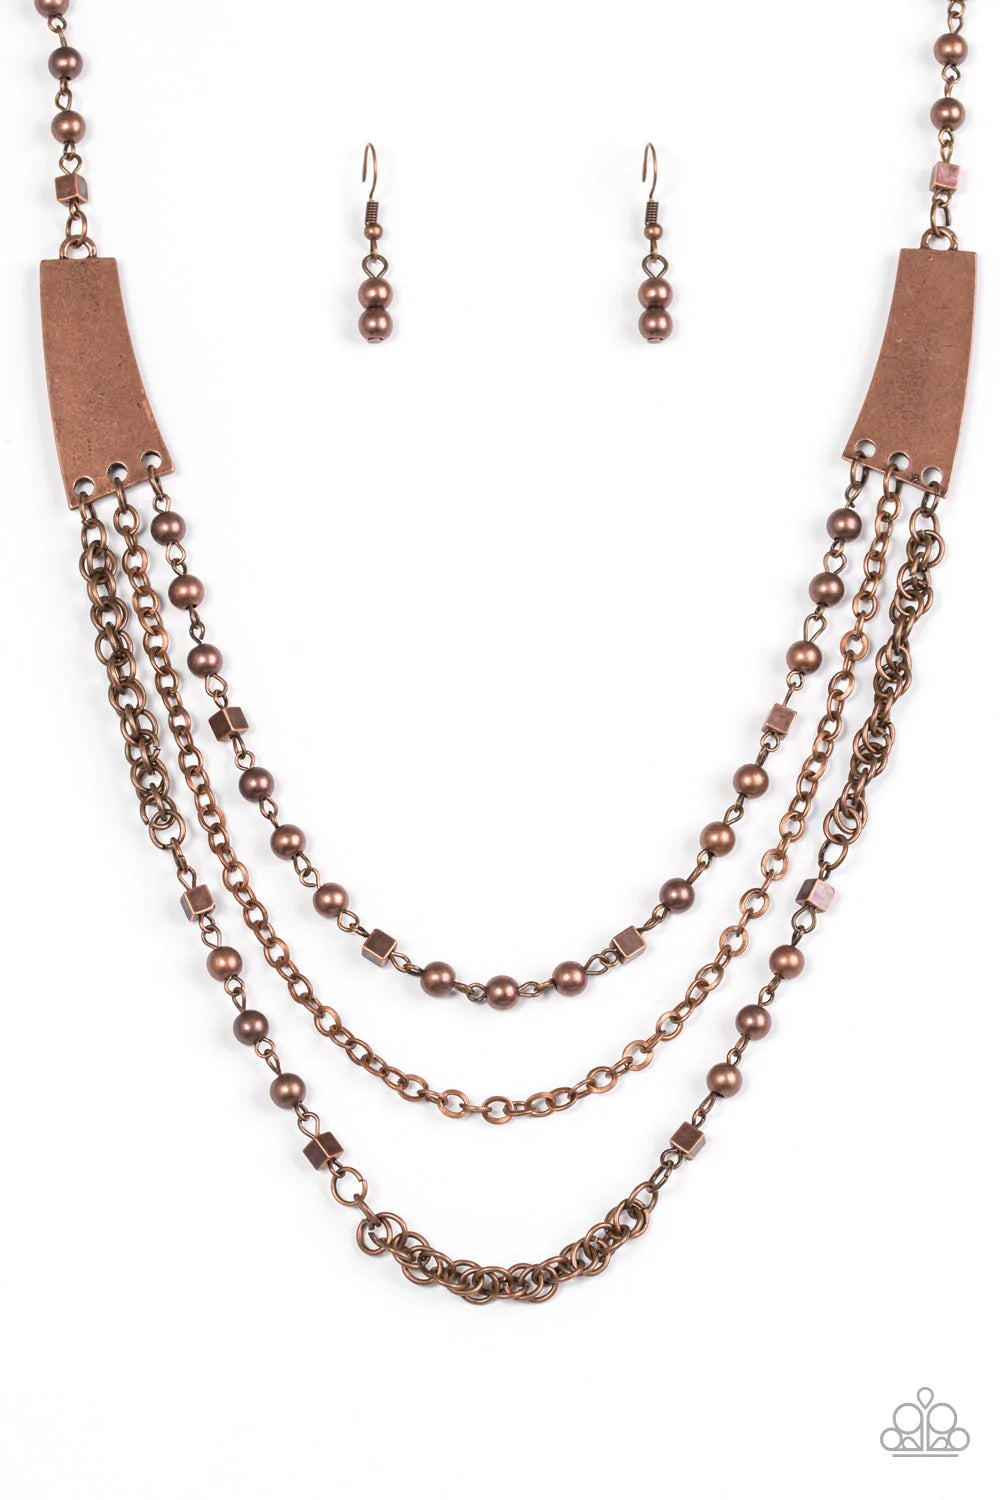 Paparazzi Accessories  - Marvelously Metro - Copper Necklace